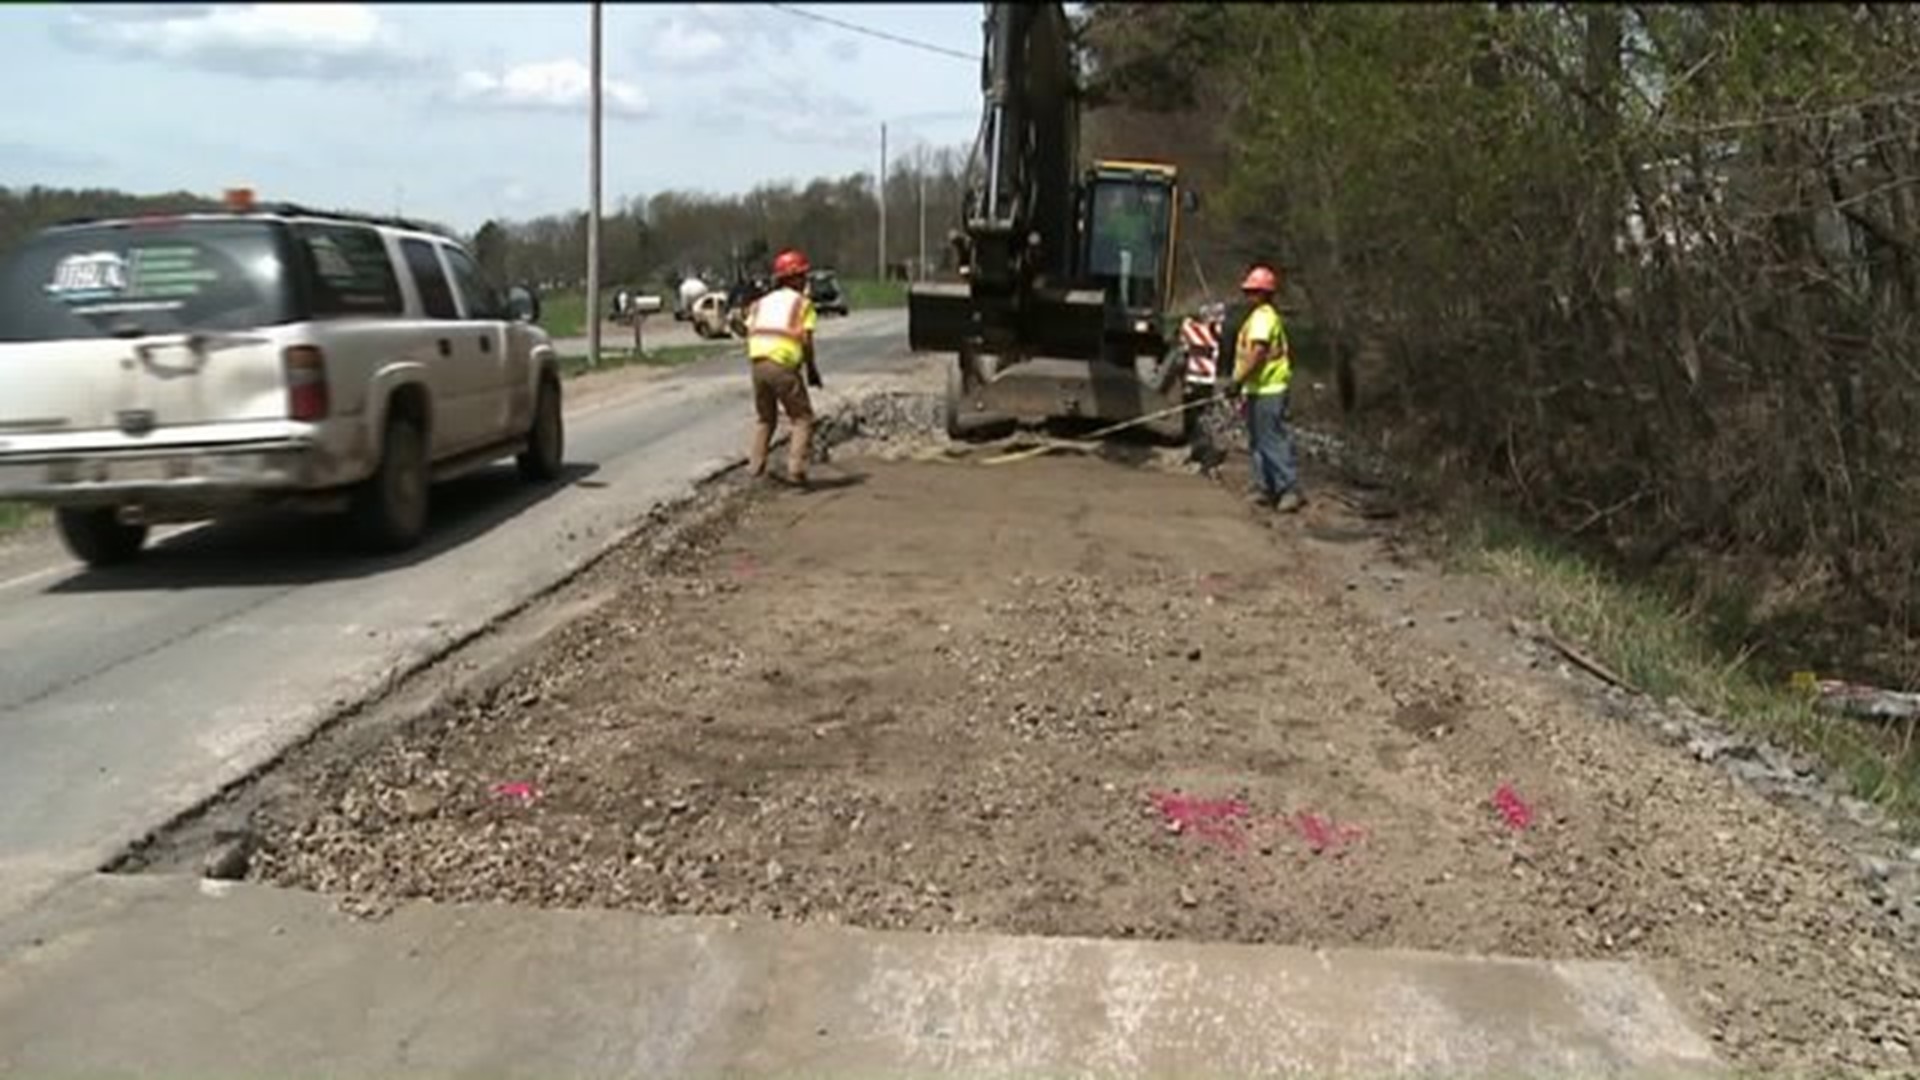 Big Improvements on Rough Stretch of Road